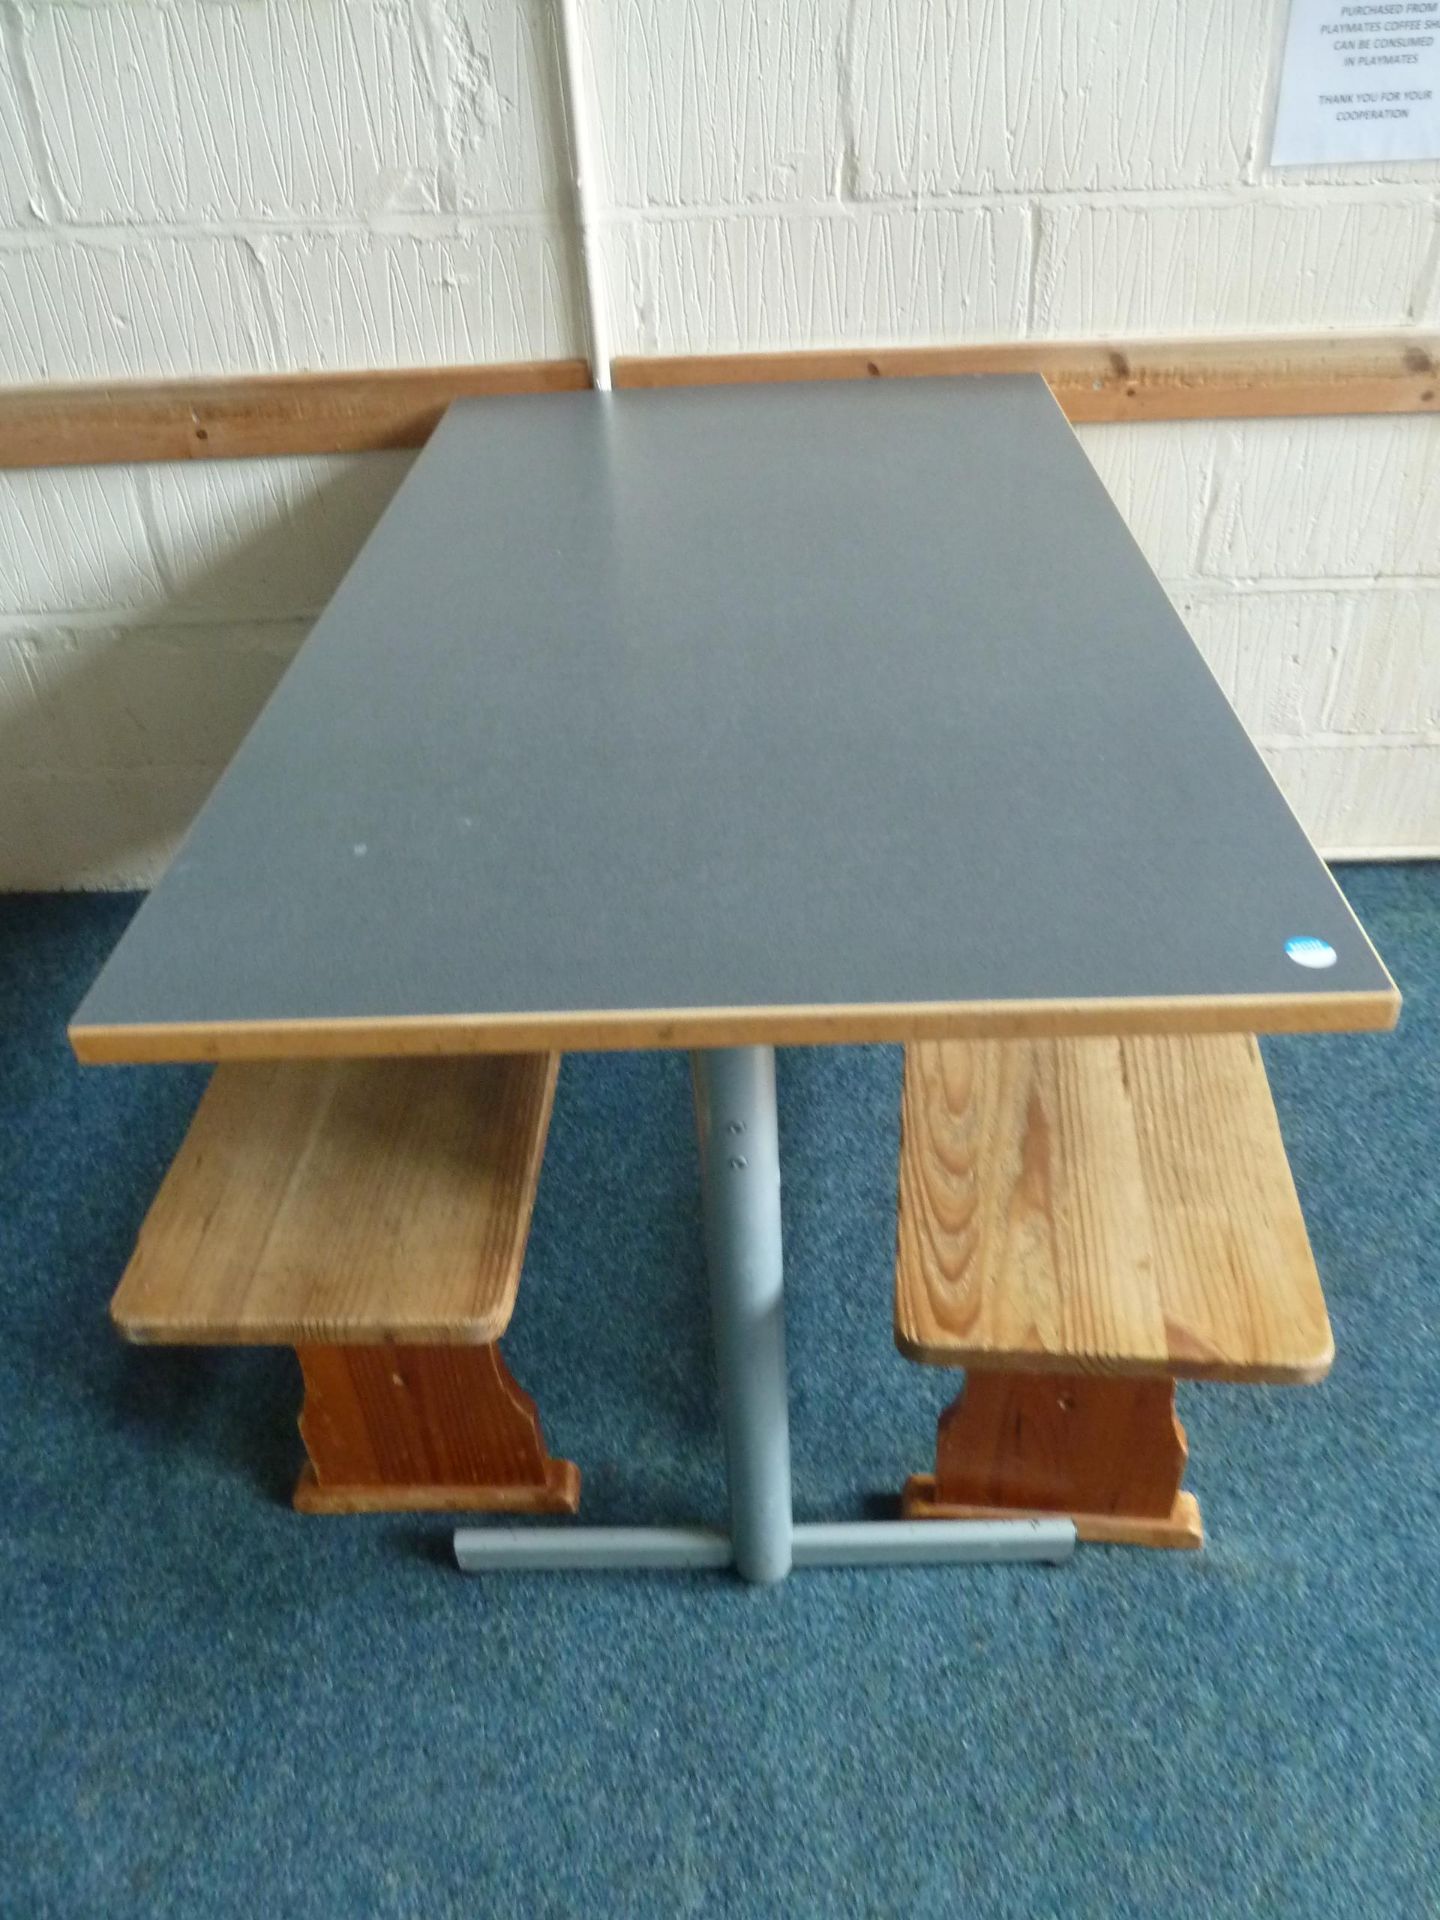 *grey topped table with 2 x wooden benches. Table 1200w x 600d x 700h. Benches - 1140w x 280d x 430h